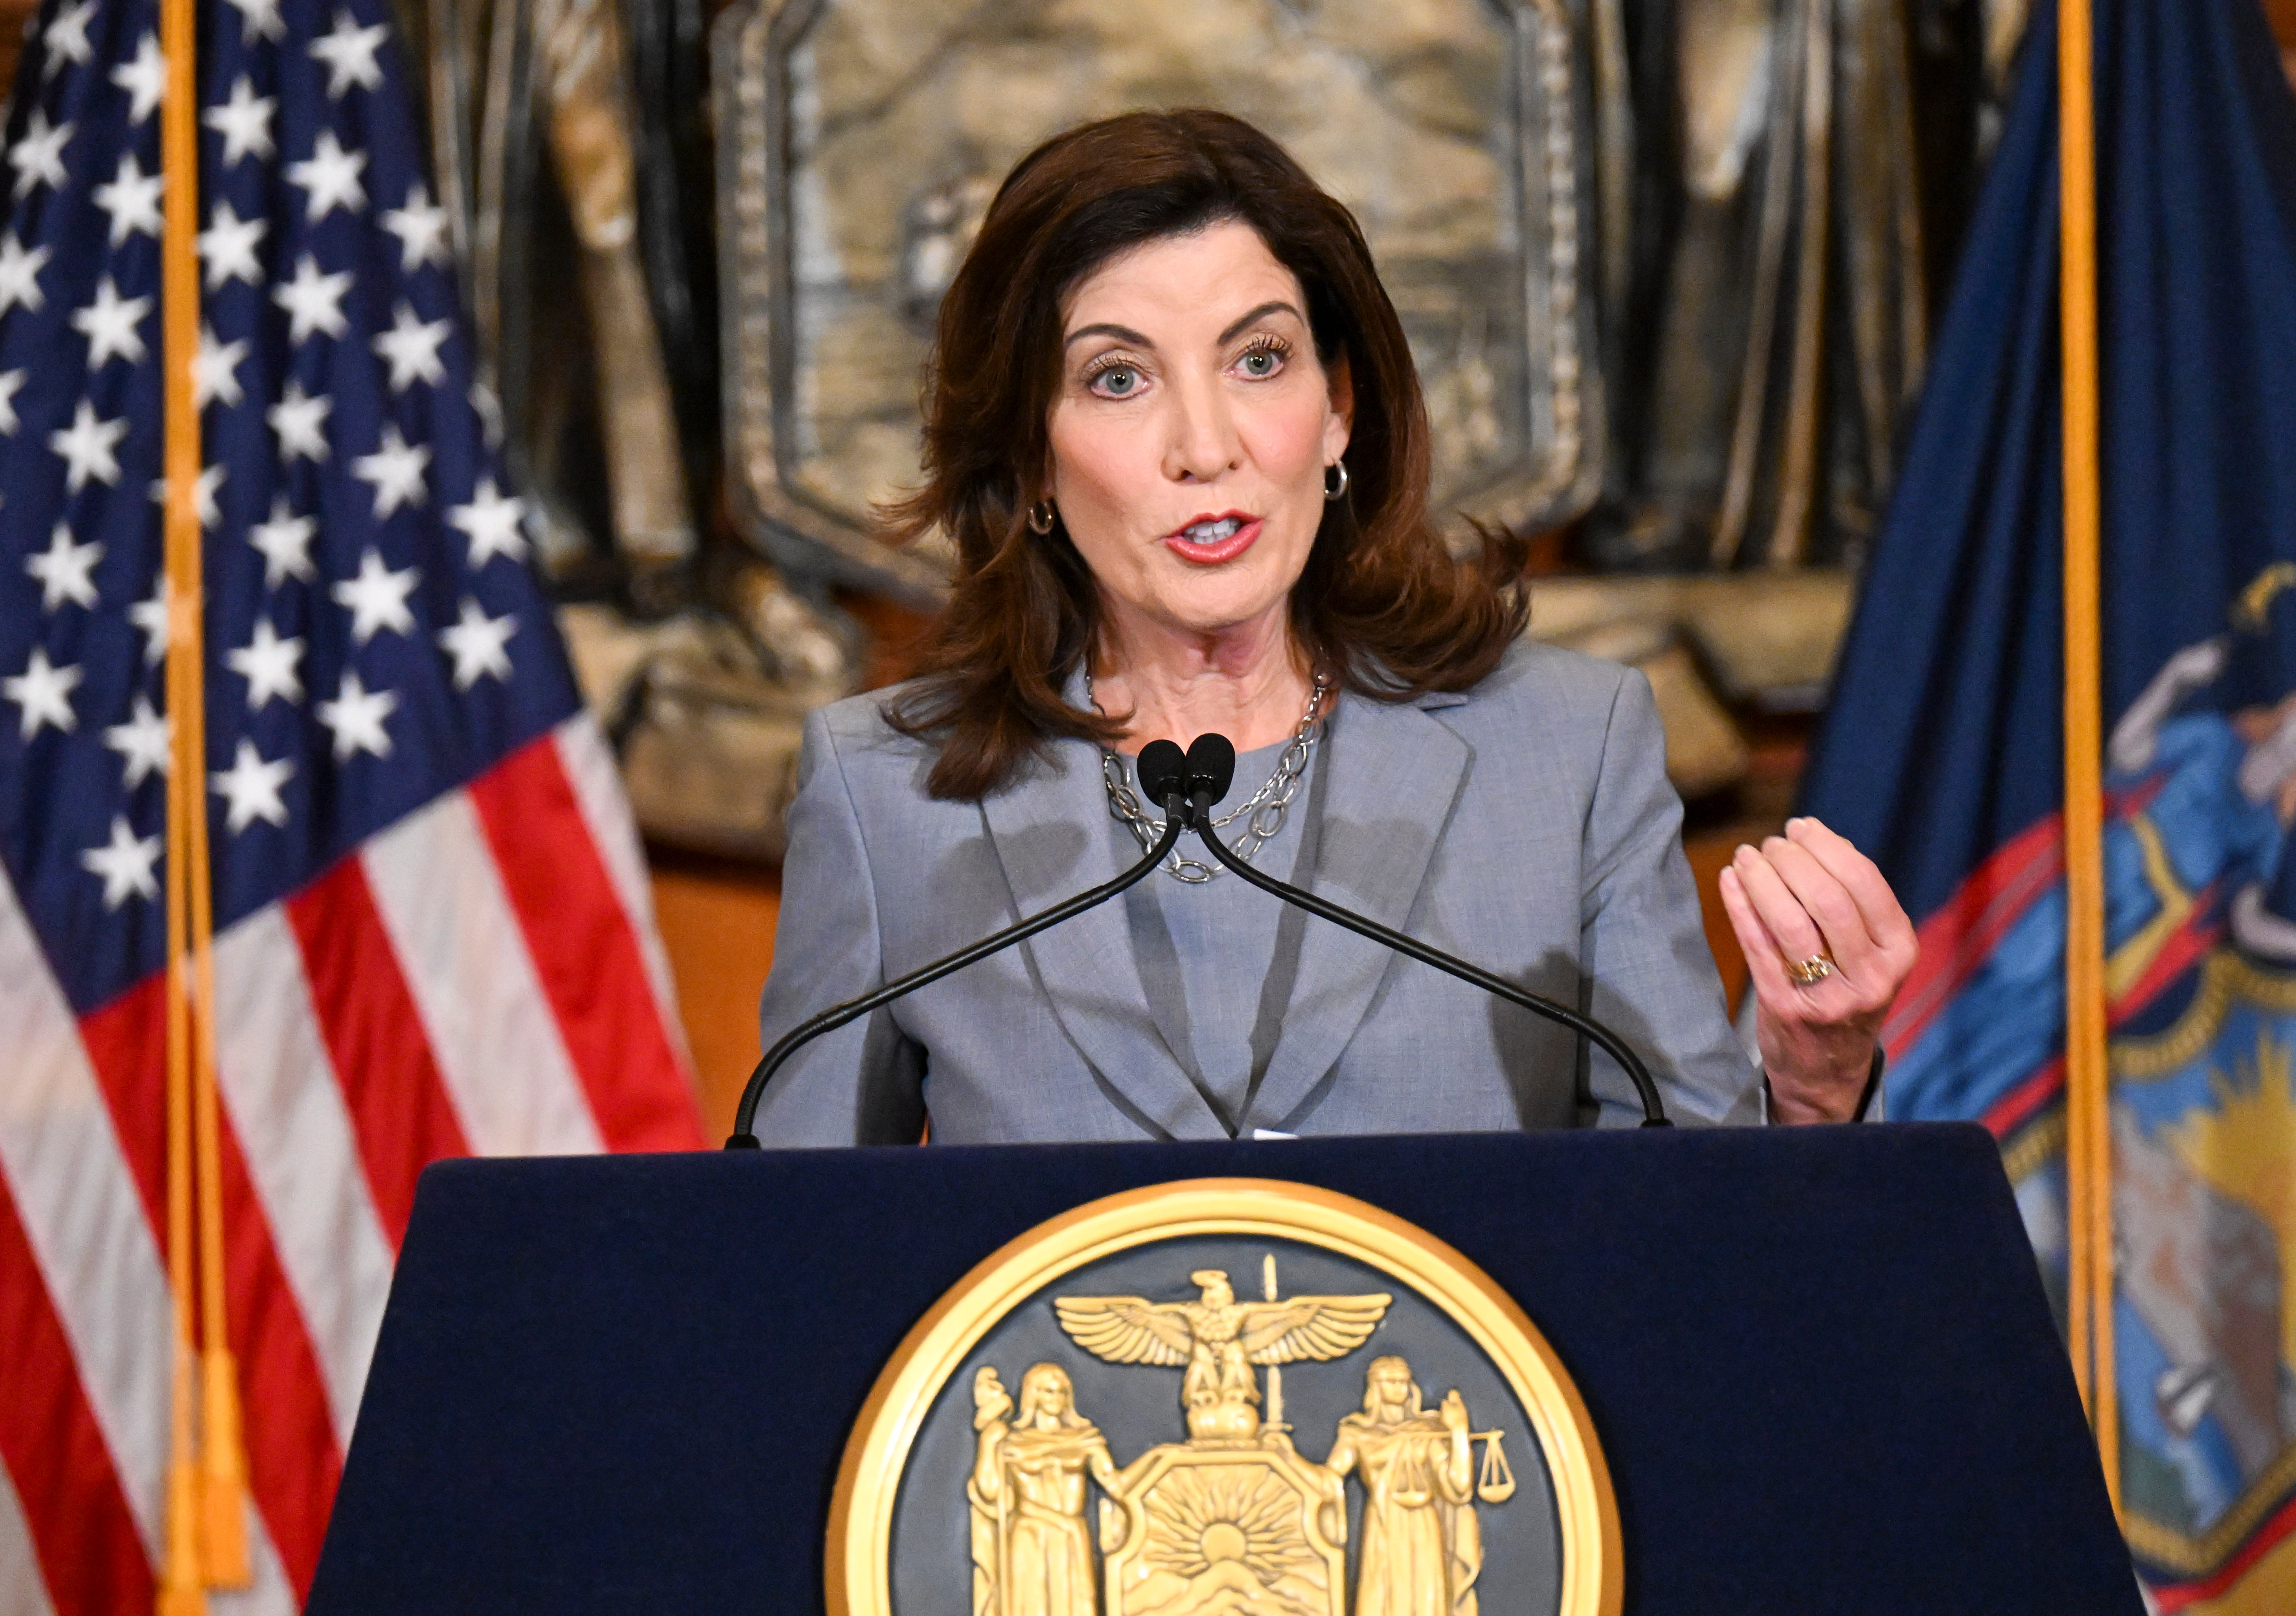 Kathy Hochul floated a mask ban on the New York City subway on Thursday